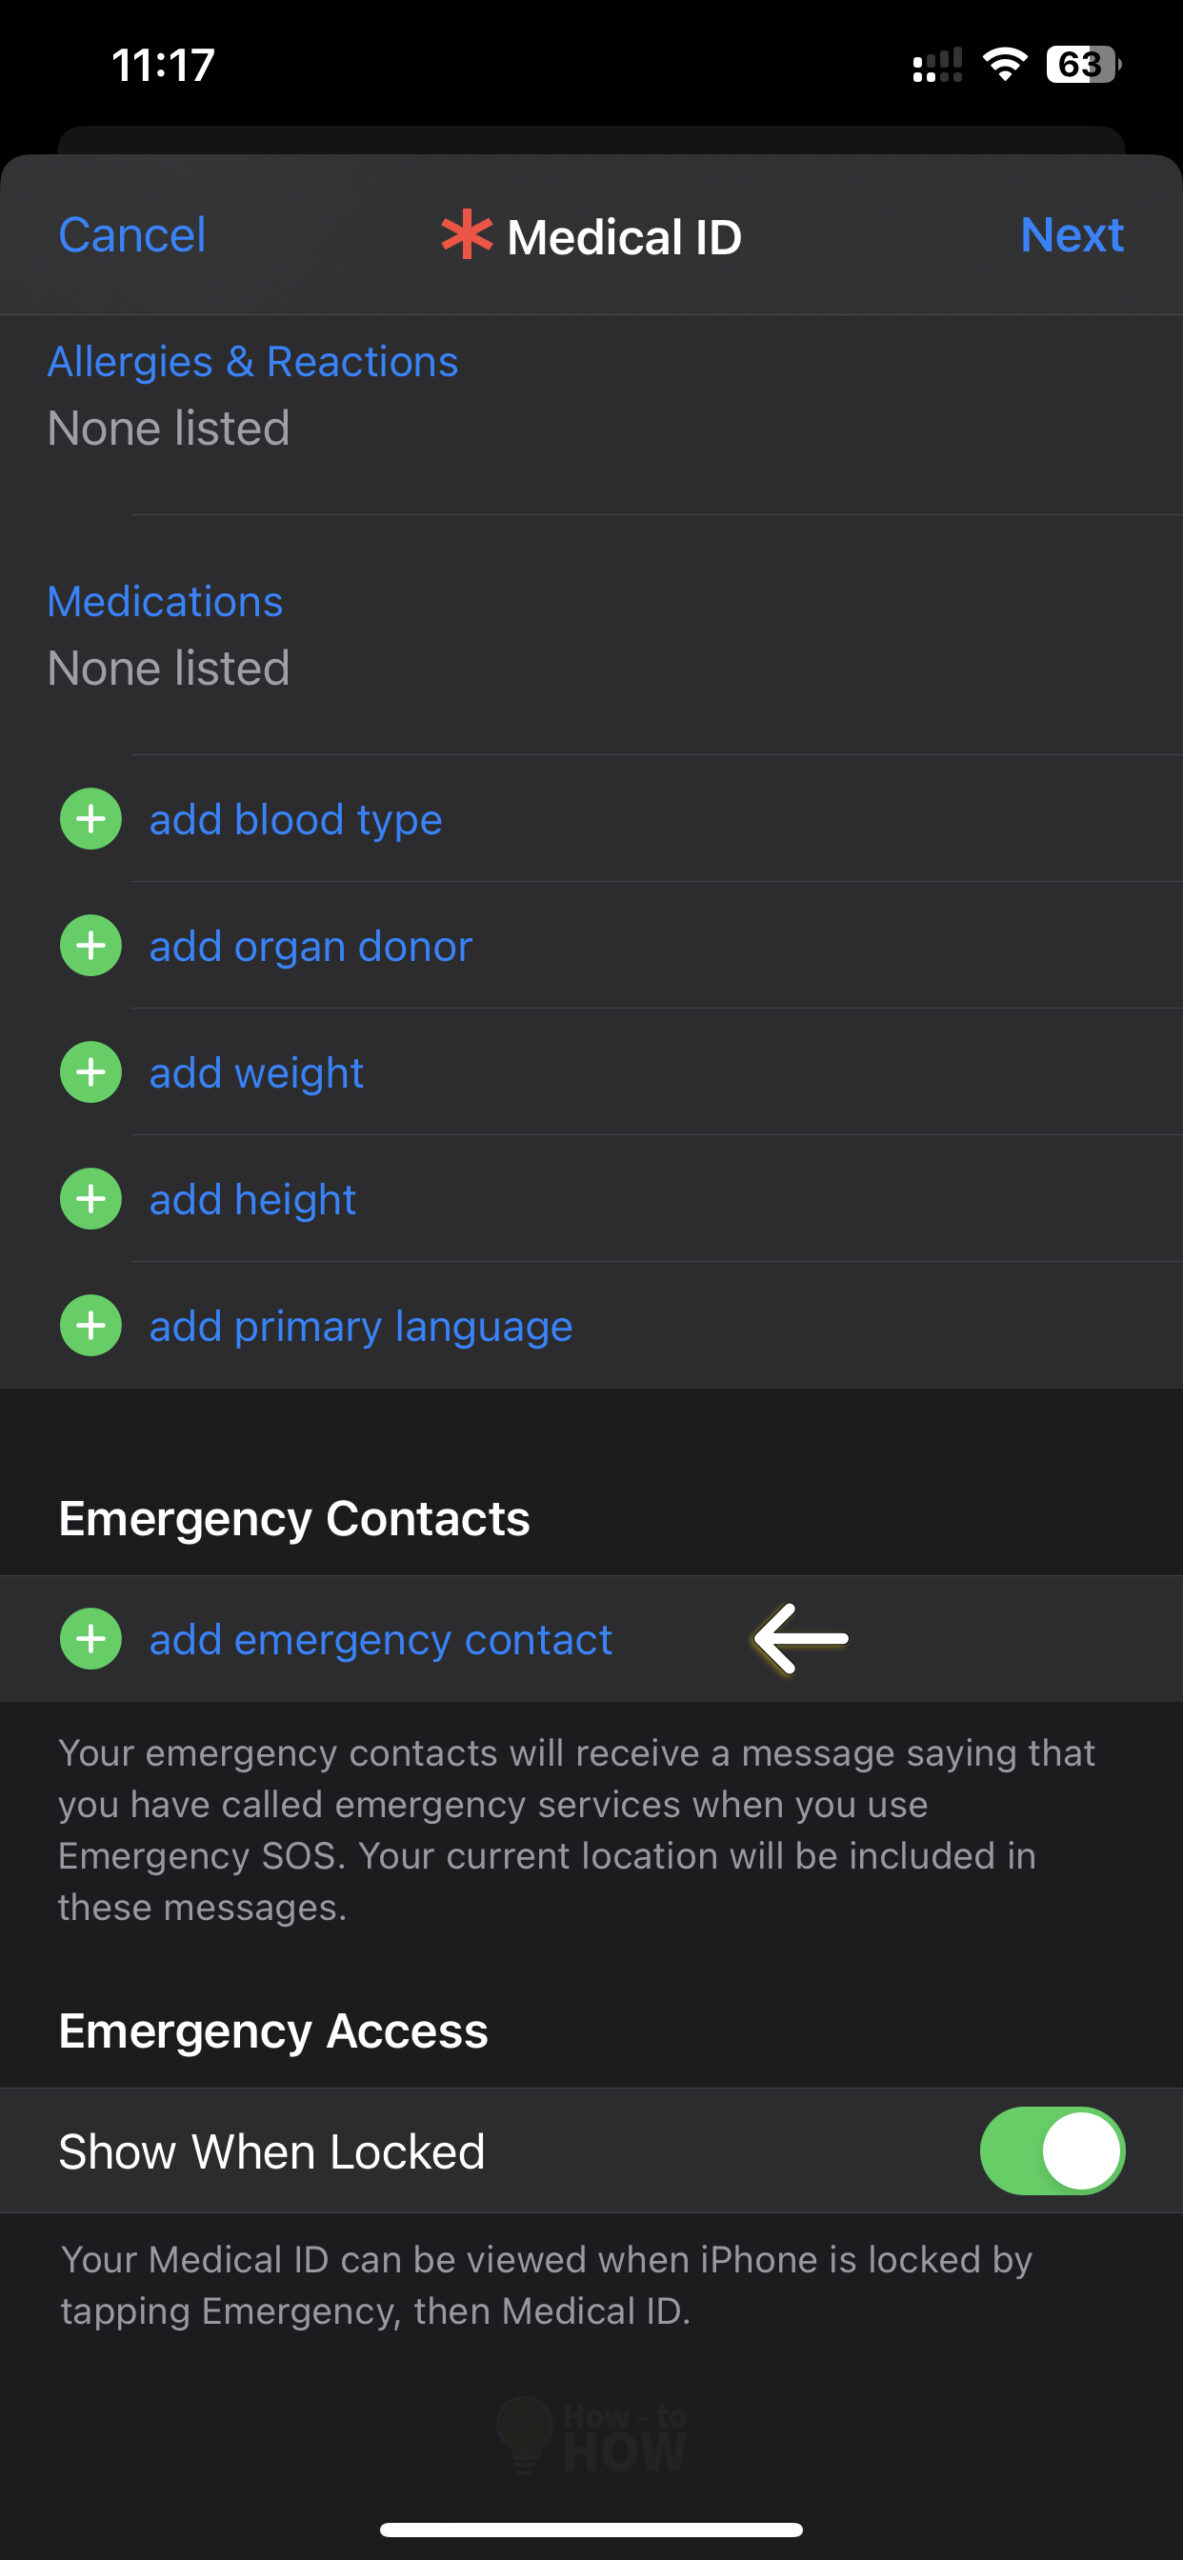 Under Medical ID scroll down to add emergency contact